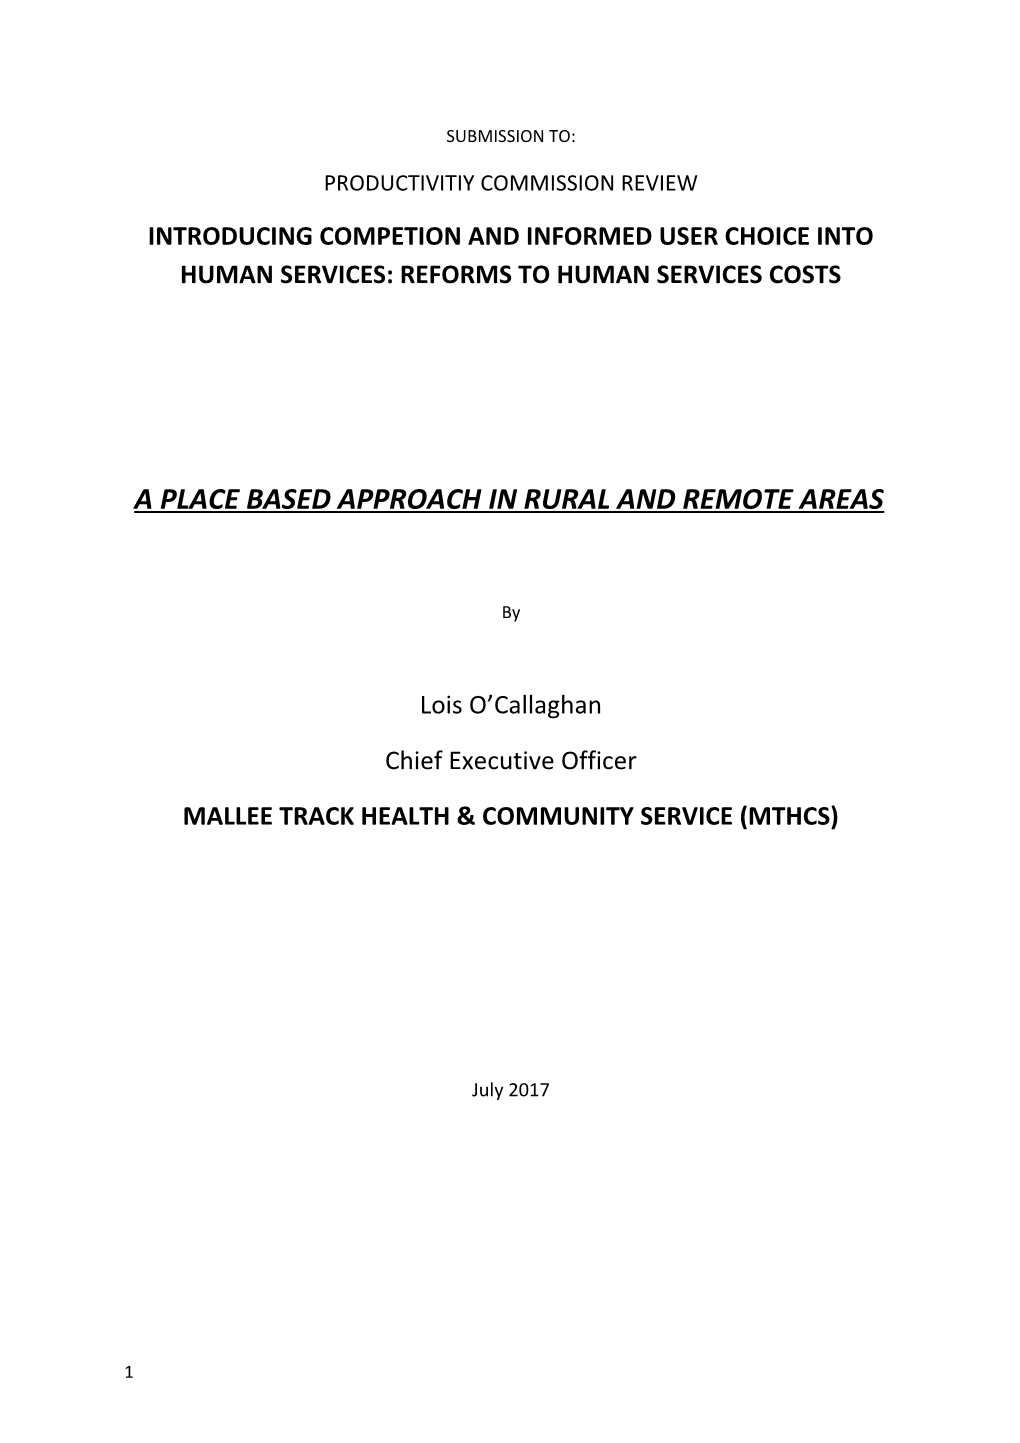 Submission DR499 - Mallee Track Health and Community Service (MTHCS) - Reforms to Human